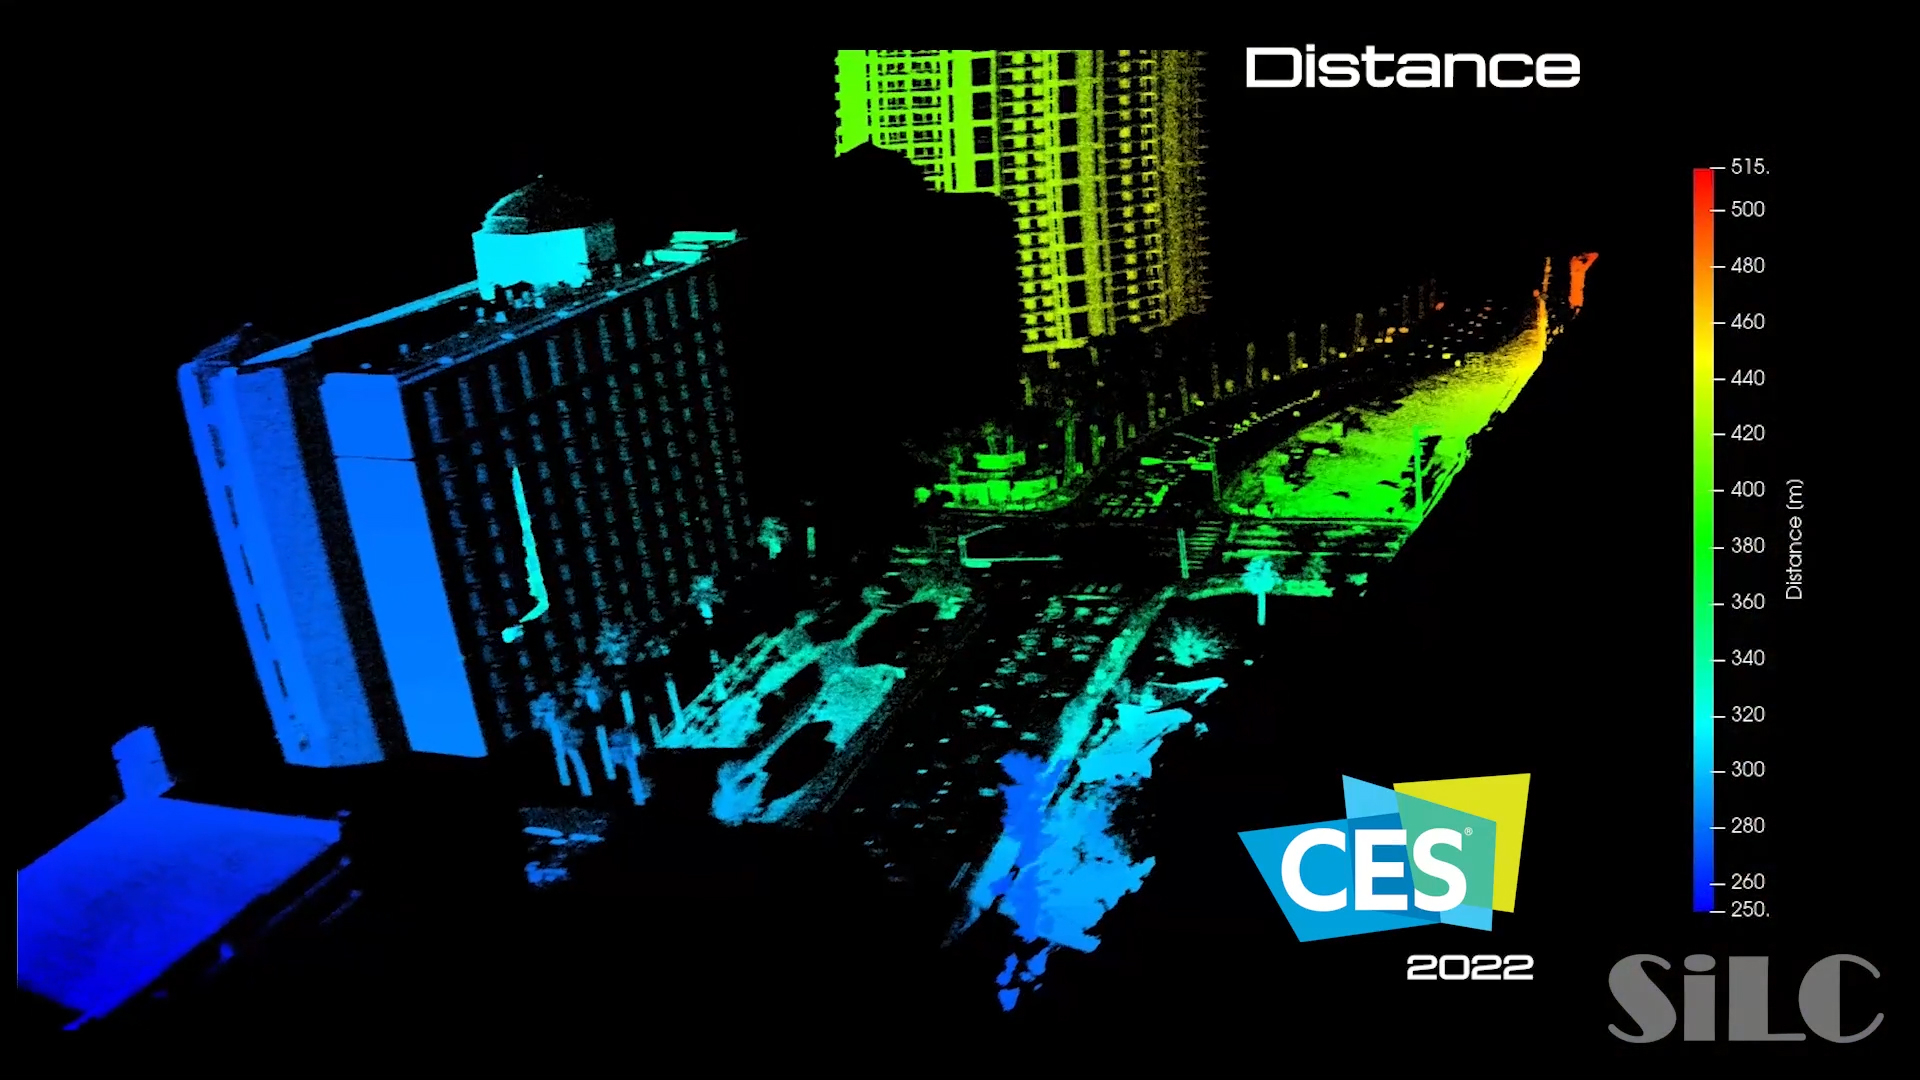 SiLC demonstrated a 500 meter operation of its Eyeonic Vision Sensor during CES 2022 in Las Vegas.